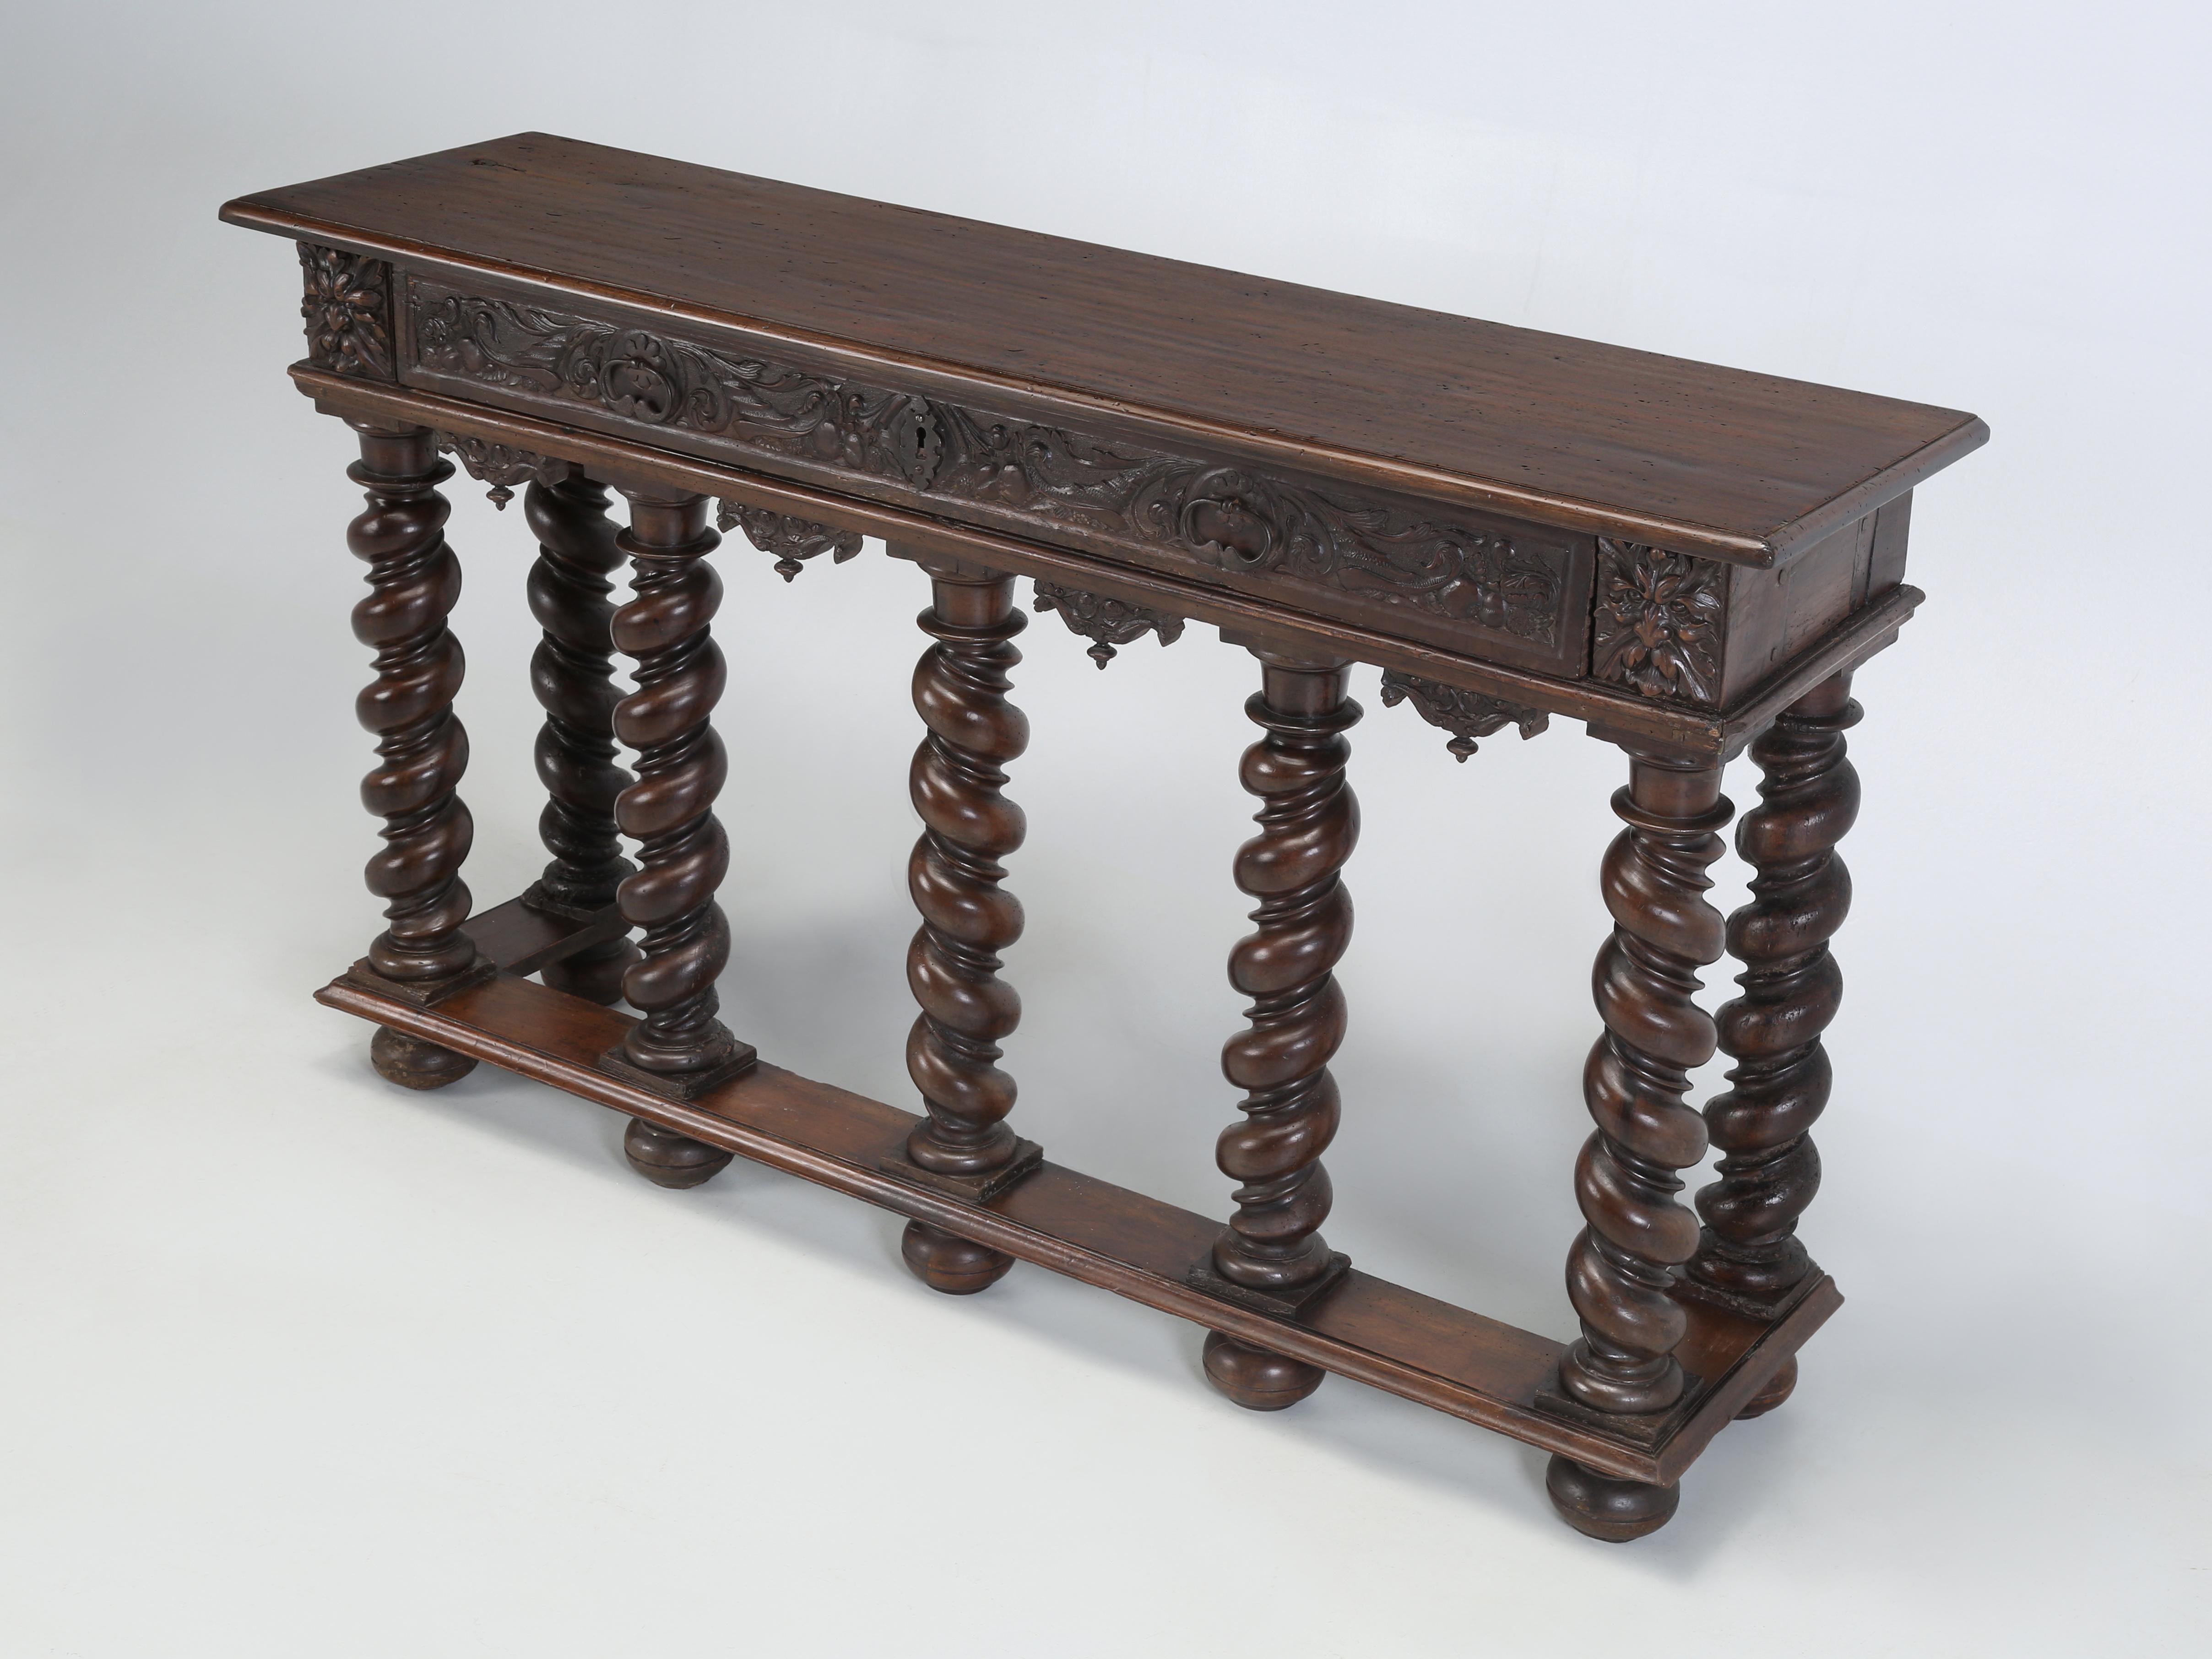 Antique and Unique Barely Twist Console Table or Entry Hall Table from the city of Brest in France. The Console Table was made in the Renaissance Style and probably dates to the early 1800’s. The restoration was limited to the top only for someone